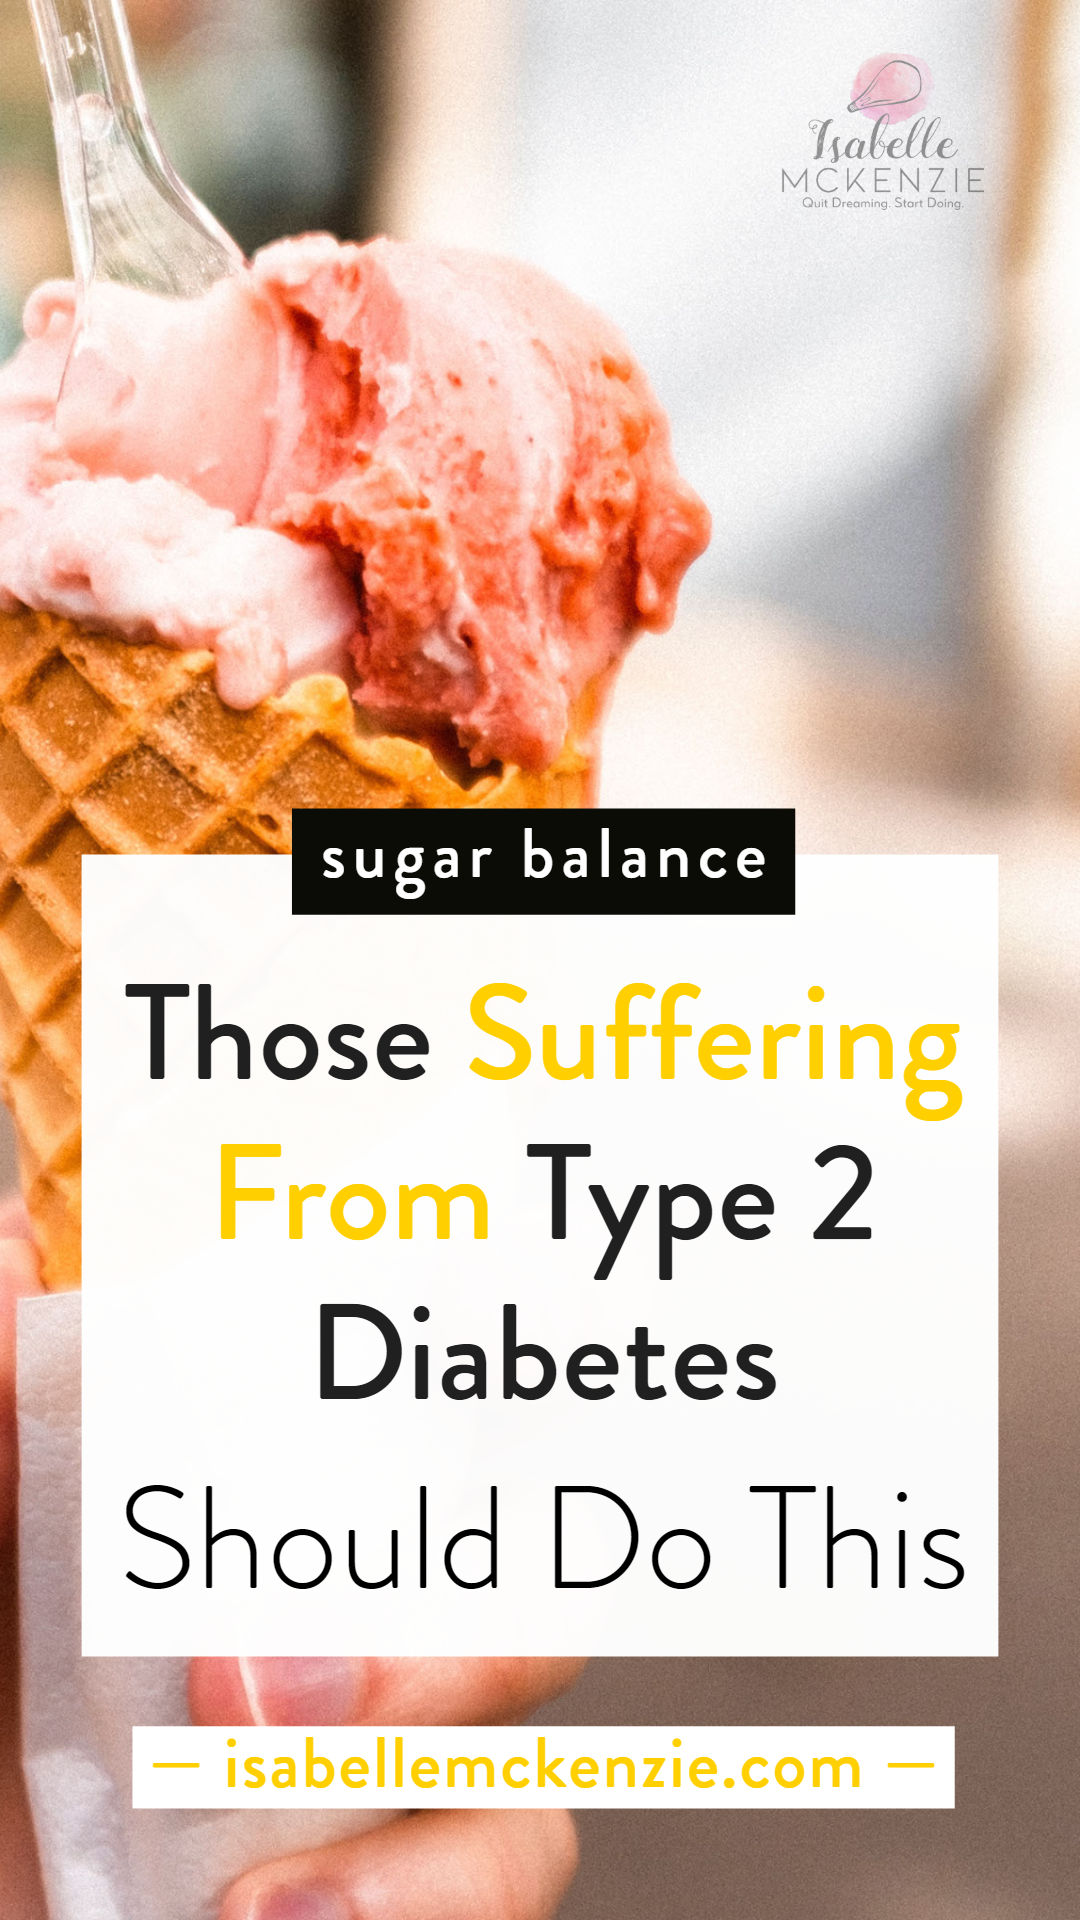  People Suffering From Type 2 Diabetes Should Do This - Isabelle McKenzie